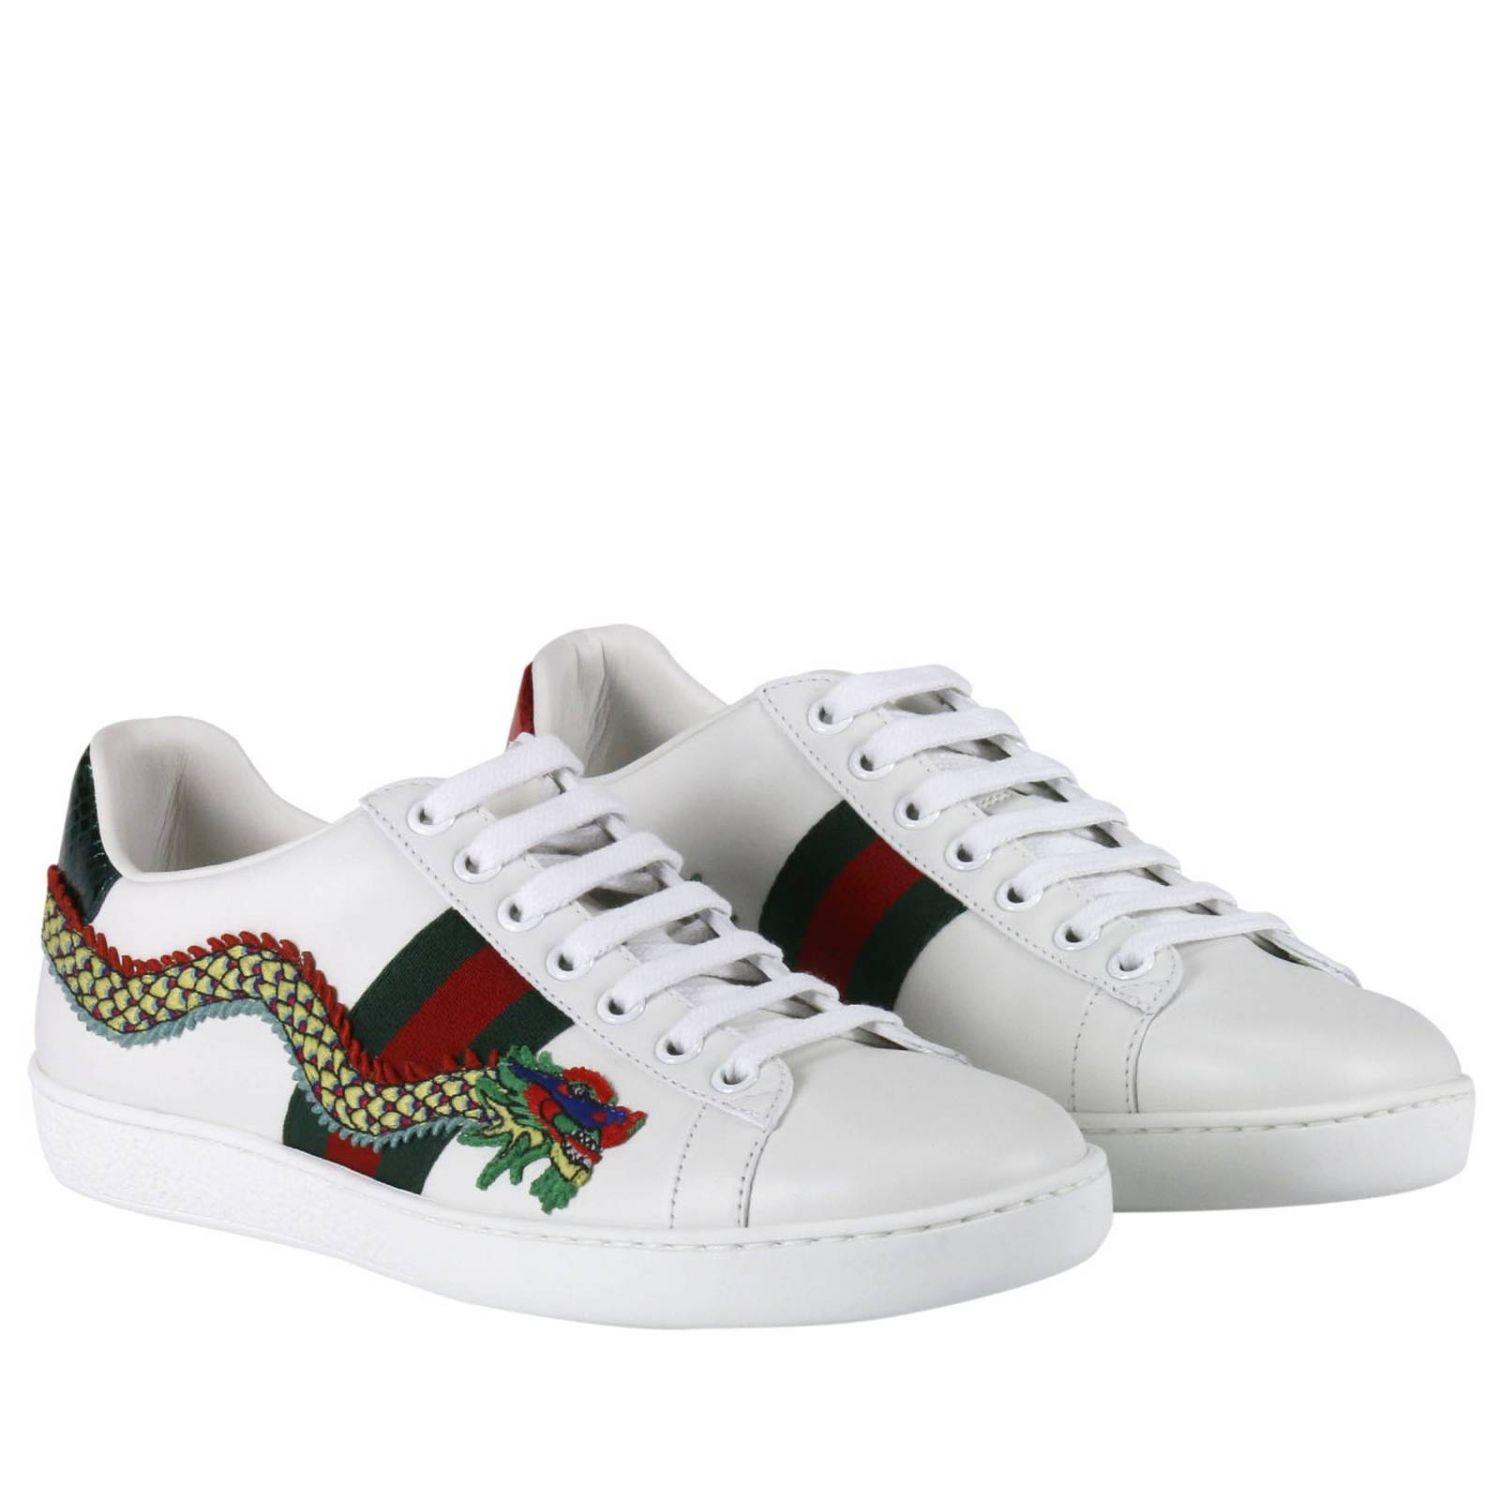 GUCCI: New Ace Sneakers with web bands and dragon embroidery | Sneakers ...